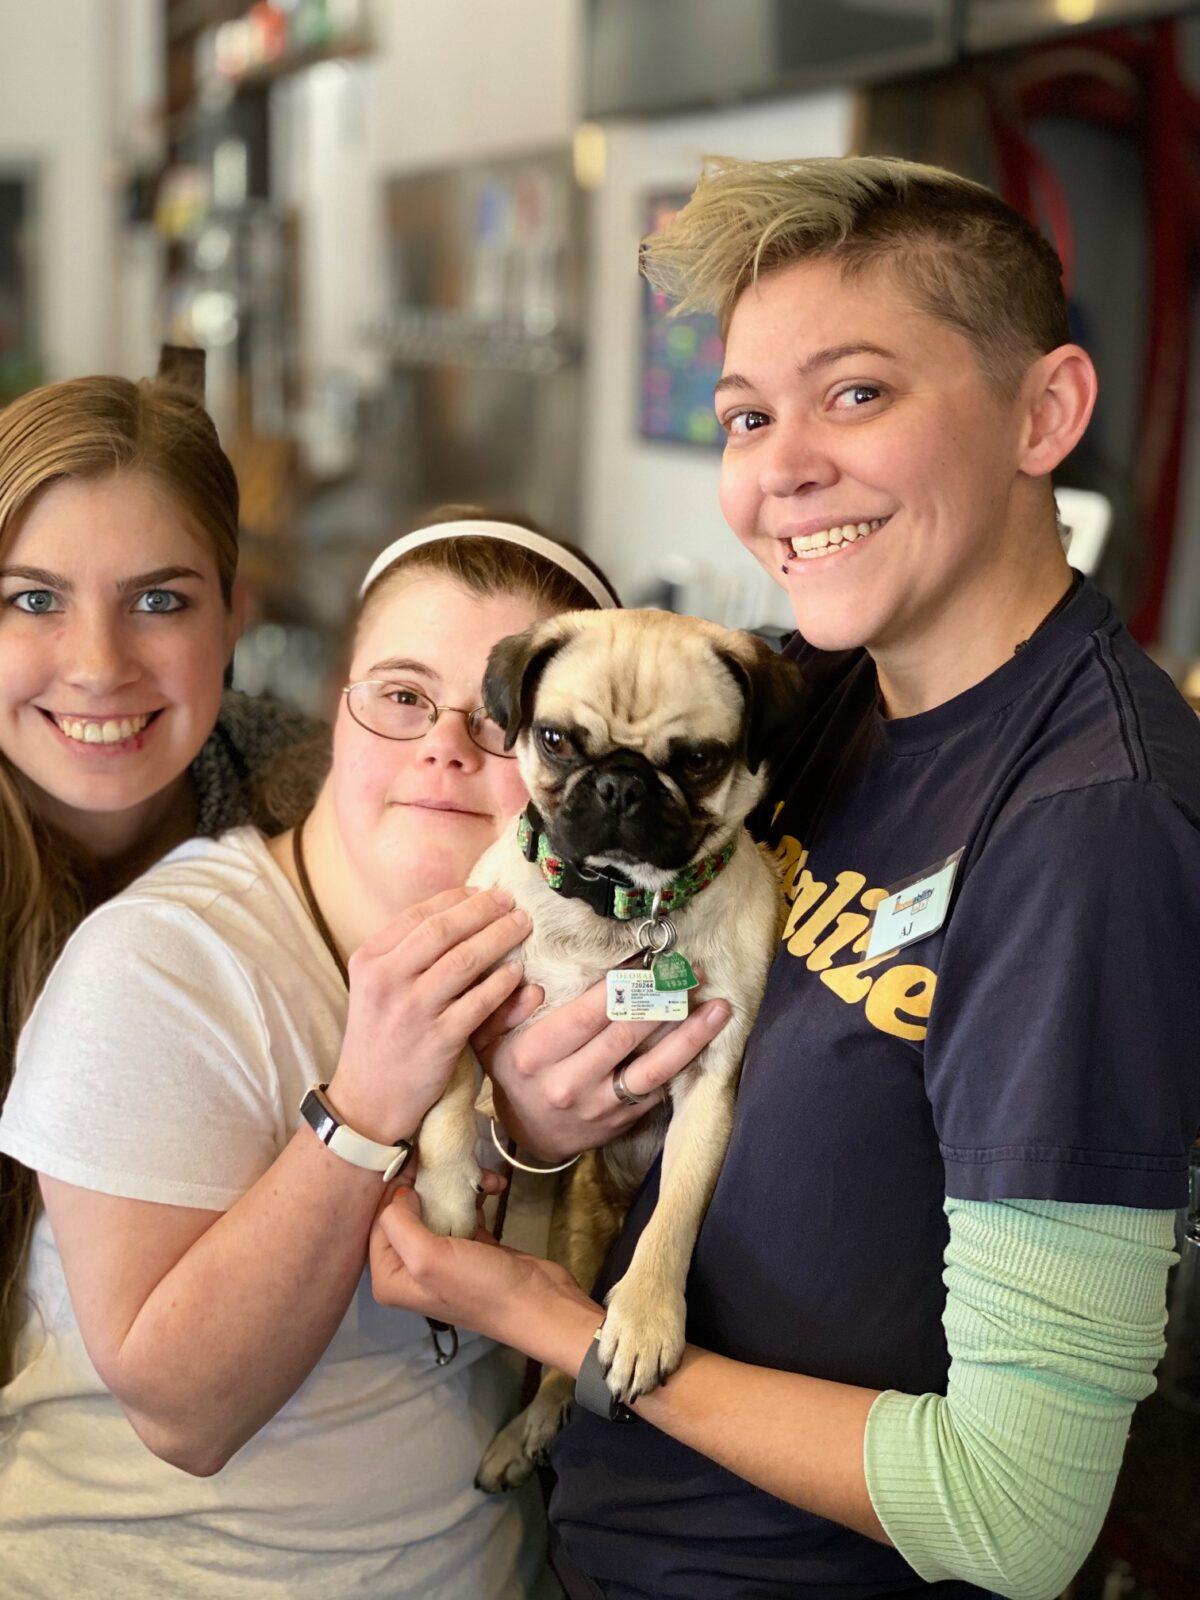 (L–R) Chelsea Whitaker, a certified occupational therapy assistant, Rachel Kurth, beertender, and AJ McCollum, manager, holding a pug for Guided by Humanity's Pug Yoga at Brewability. (<a href="https://www.facebook.com/guidedbyhumanity">www.facebook.com/guidedbyhumanit</a>y) (Courtesy of <a href="https://www.brew-ability.com/">Brewability Lab</a>)